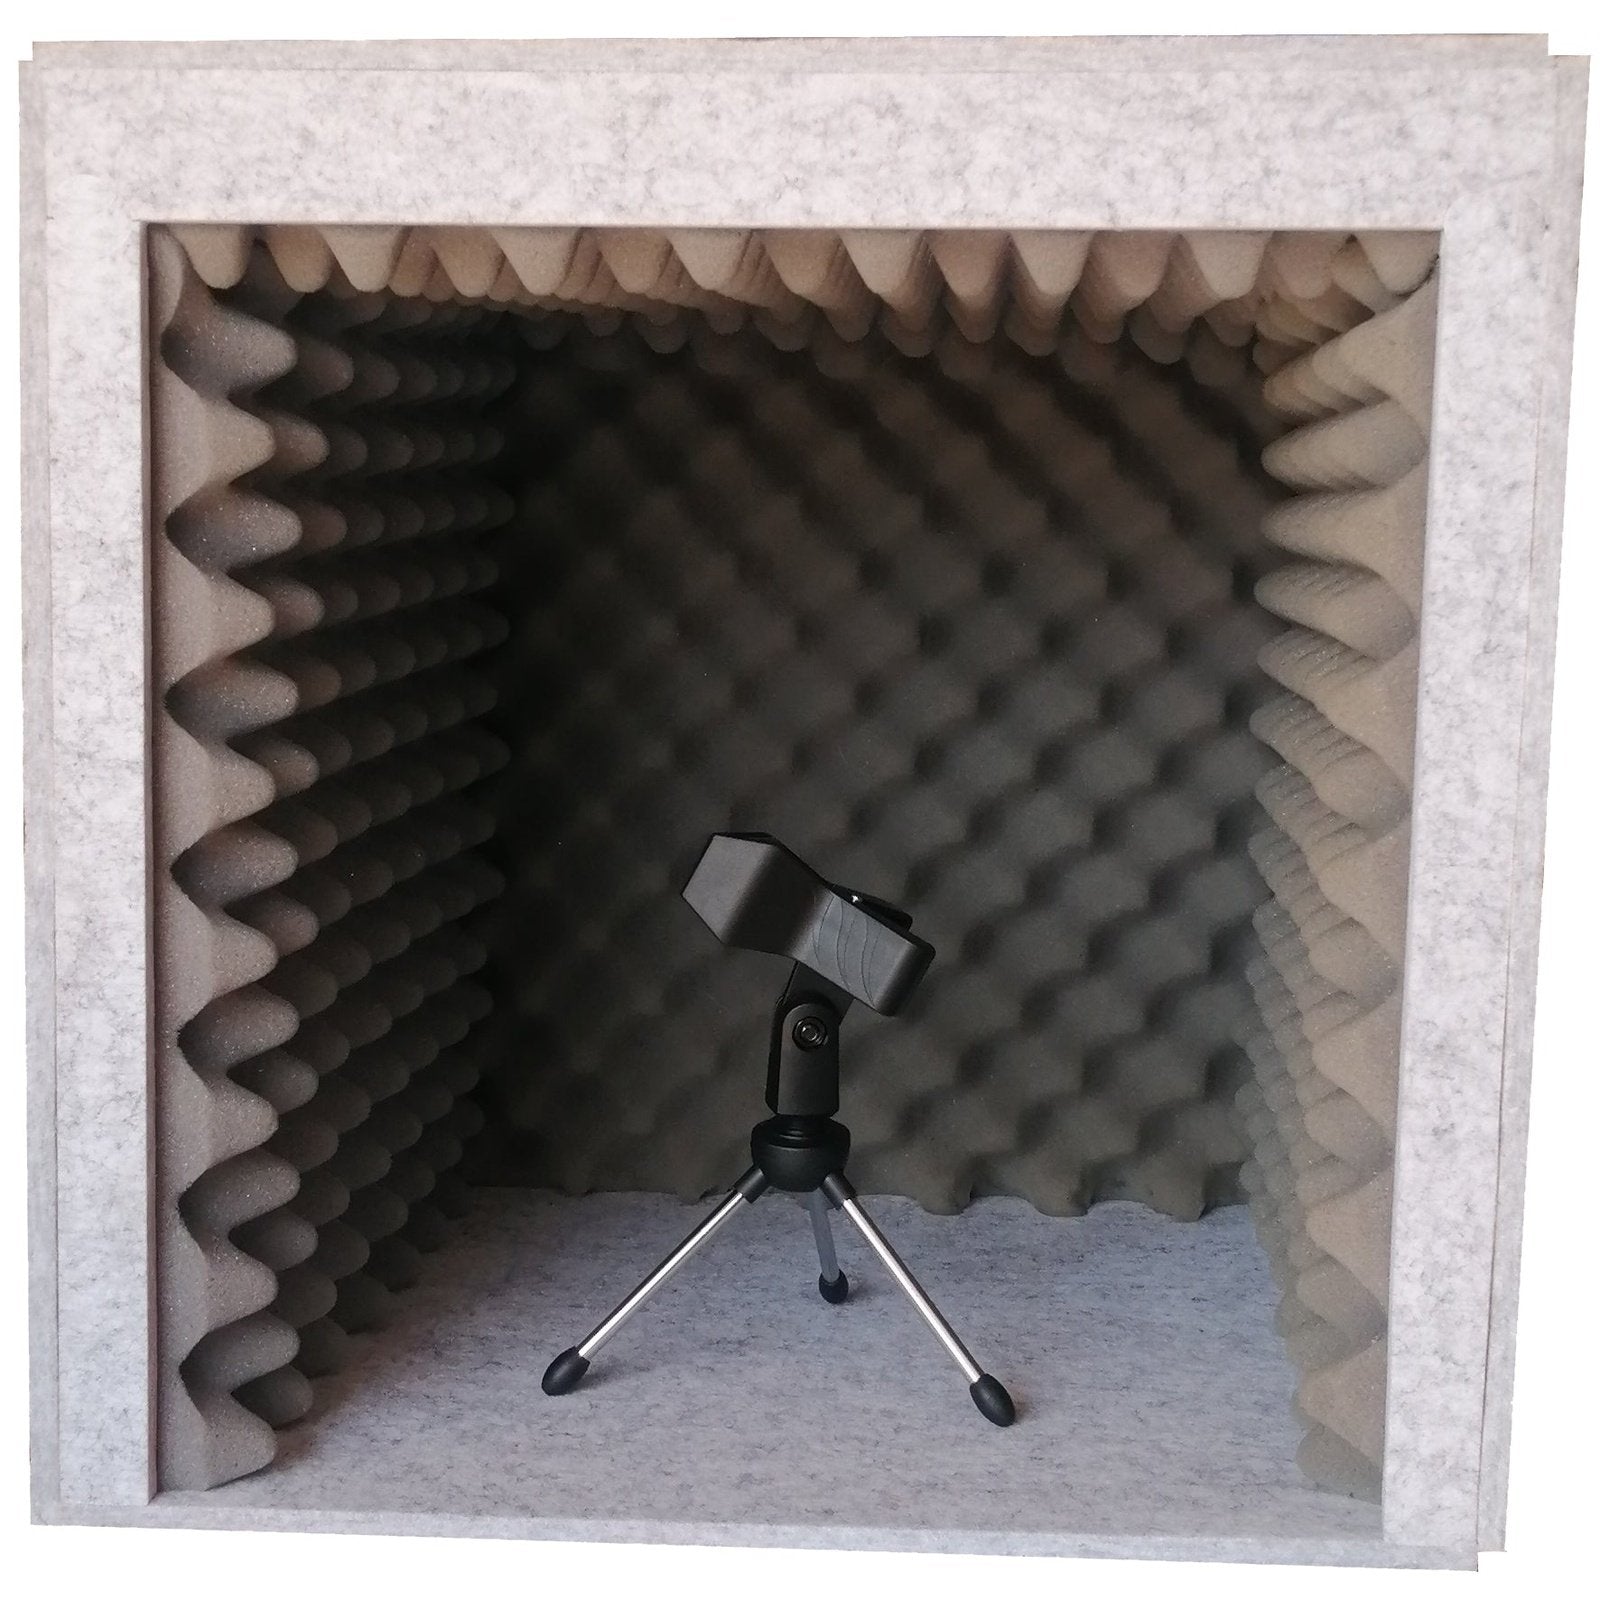 Acoustic vocal audio recording and isolation booth